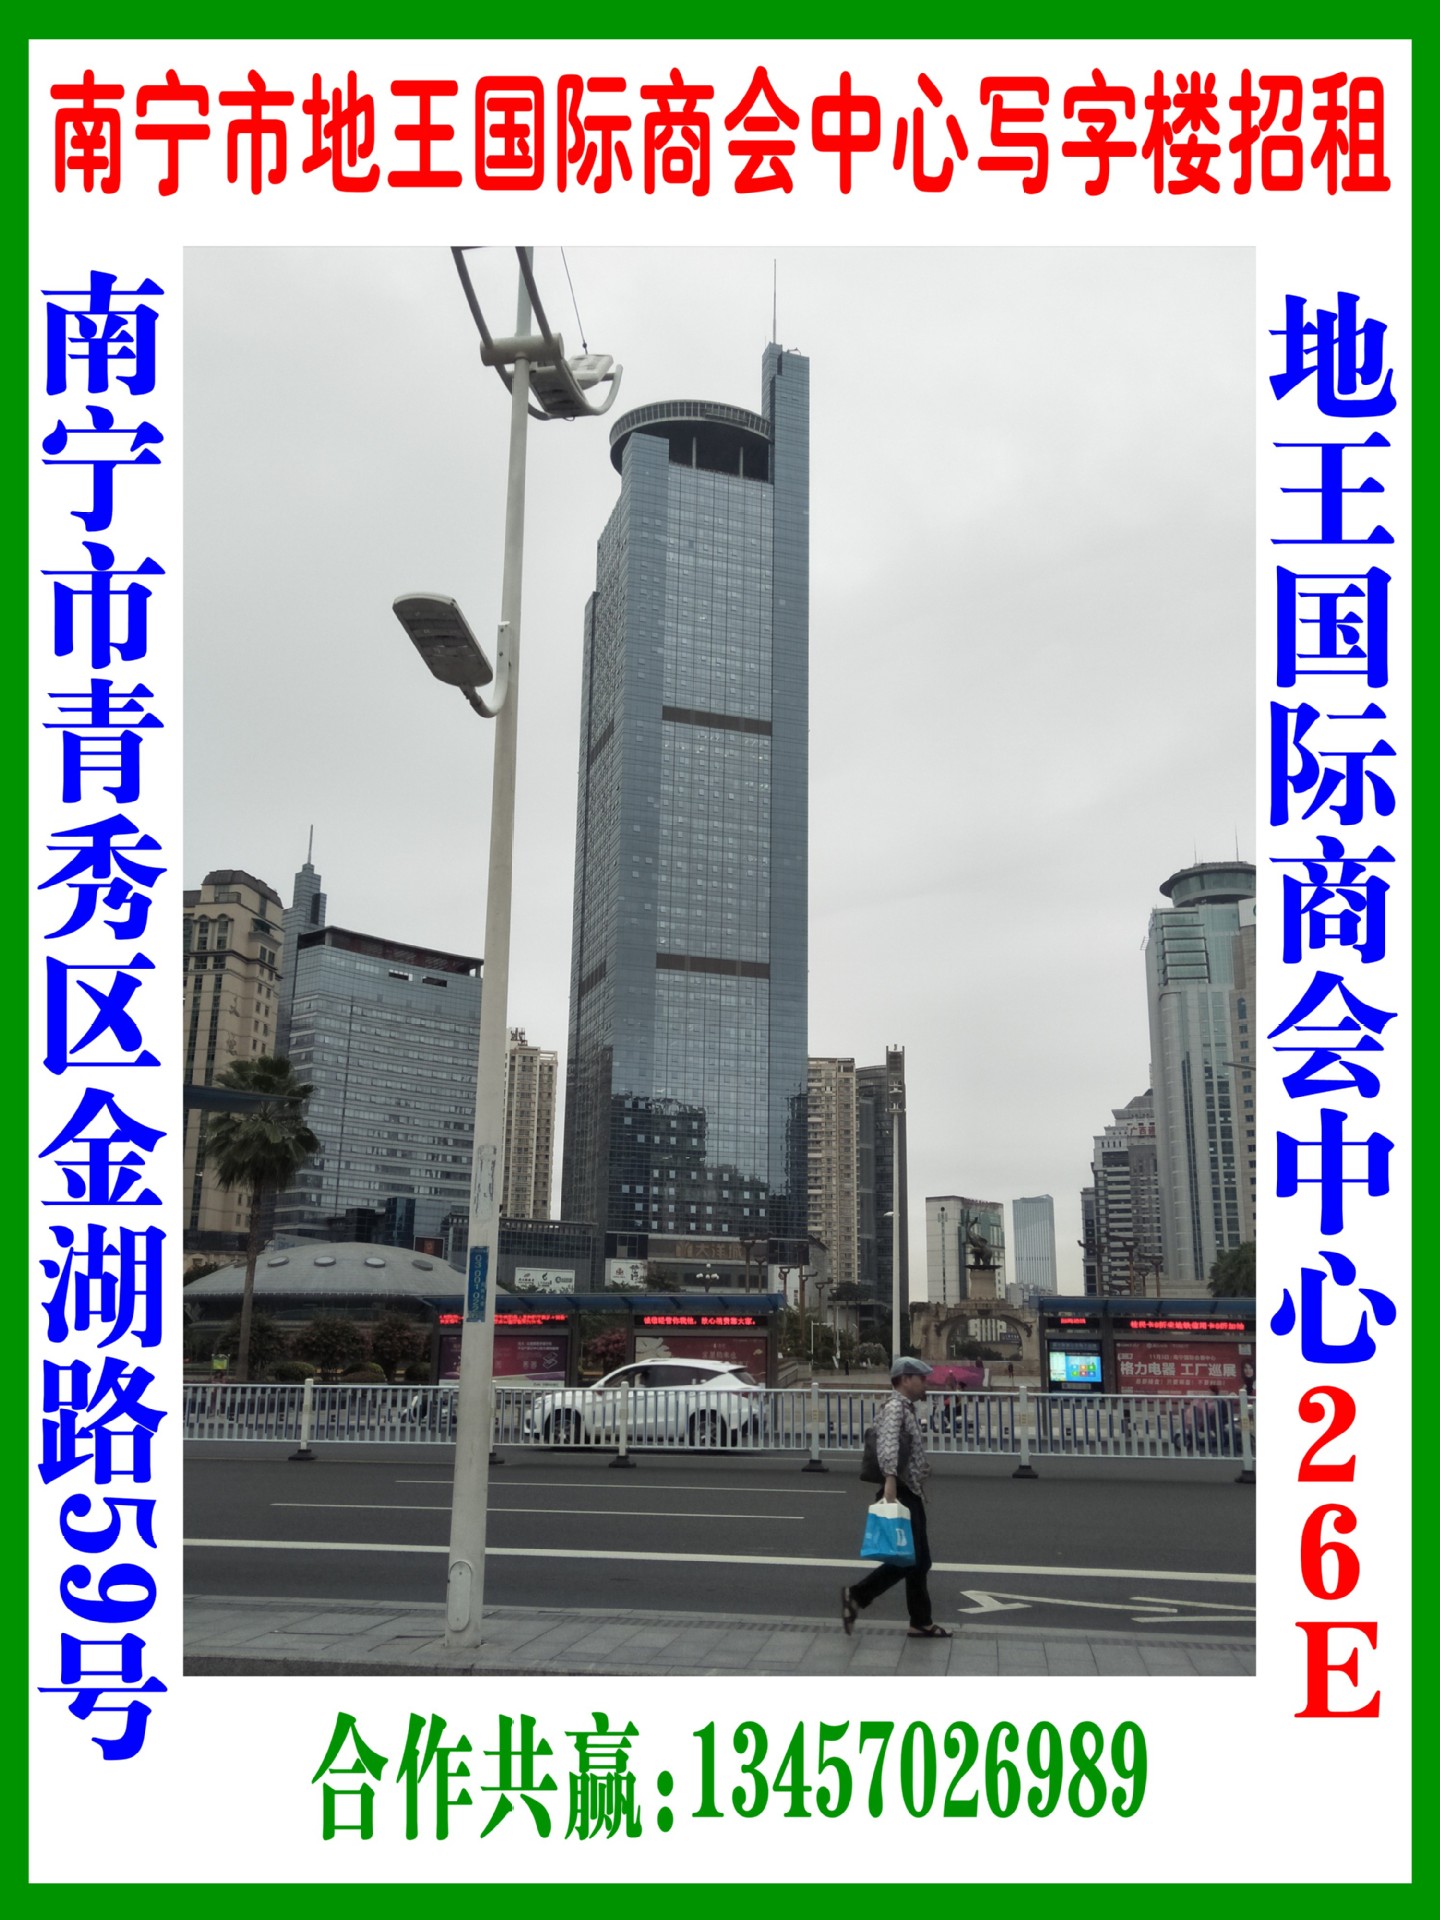 Nanning Qingxiu District Lake 59 Office For rent Wang International Chamber of Commerce core Office For rent